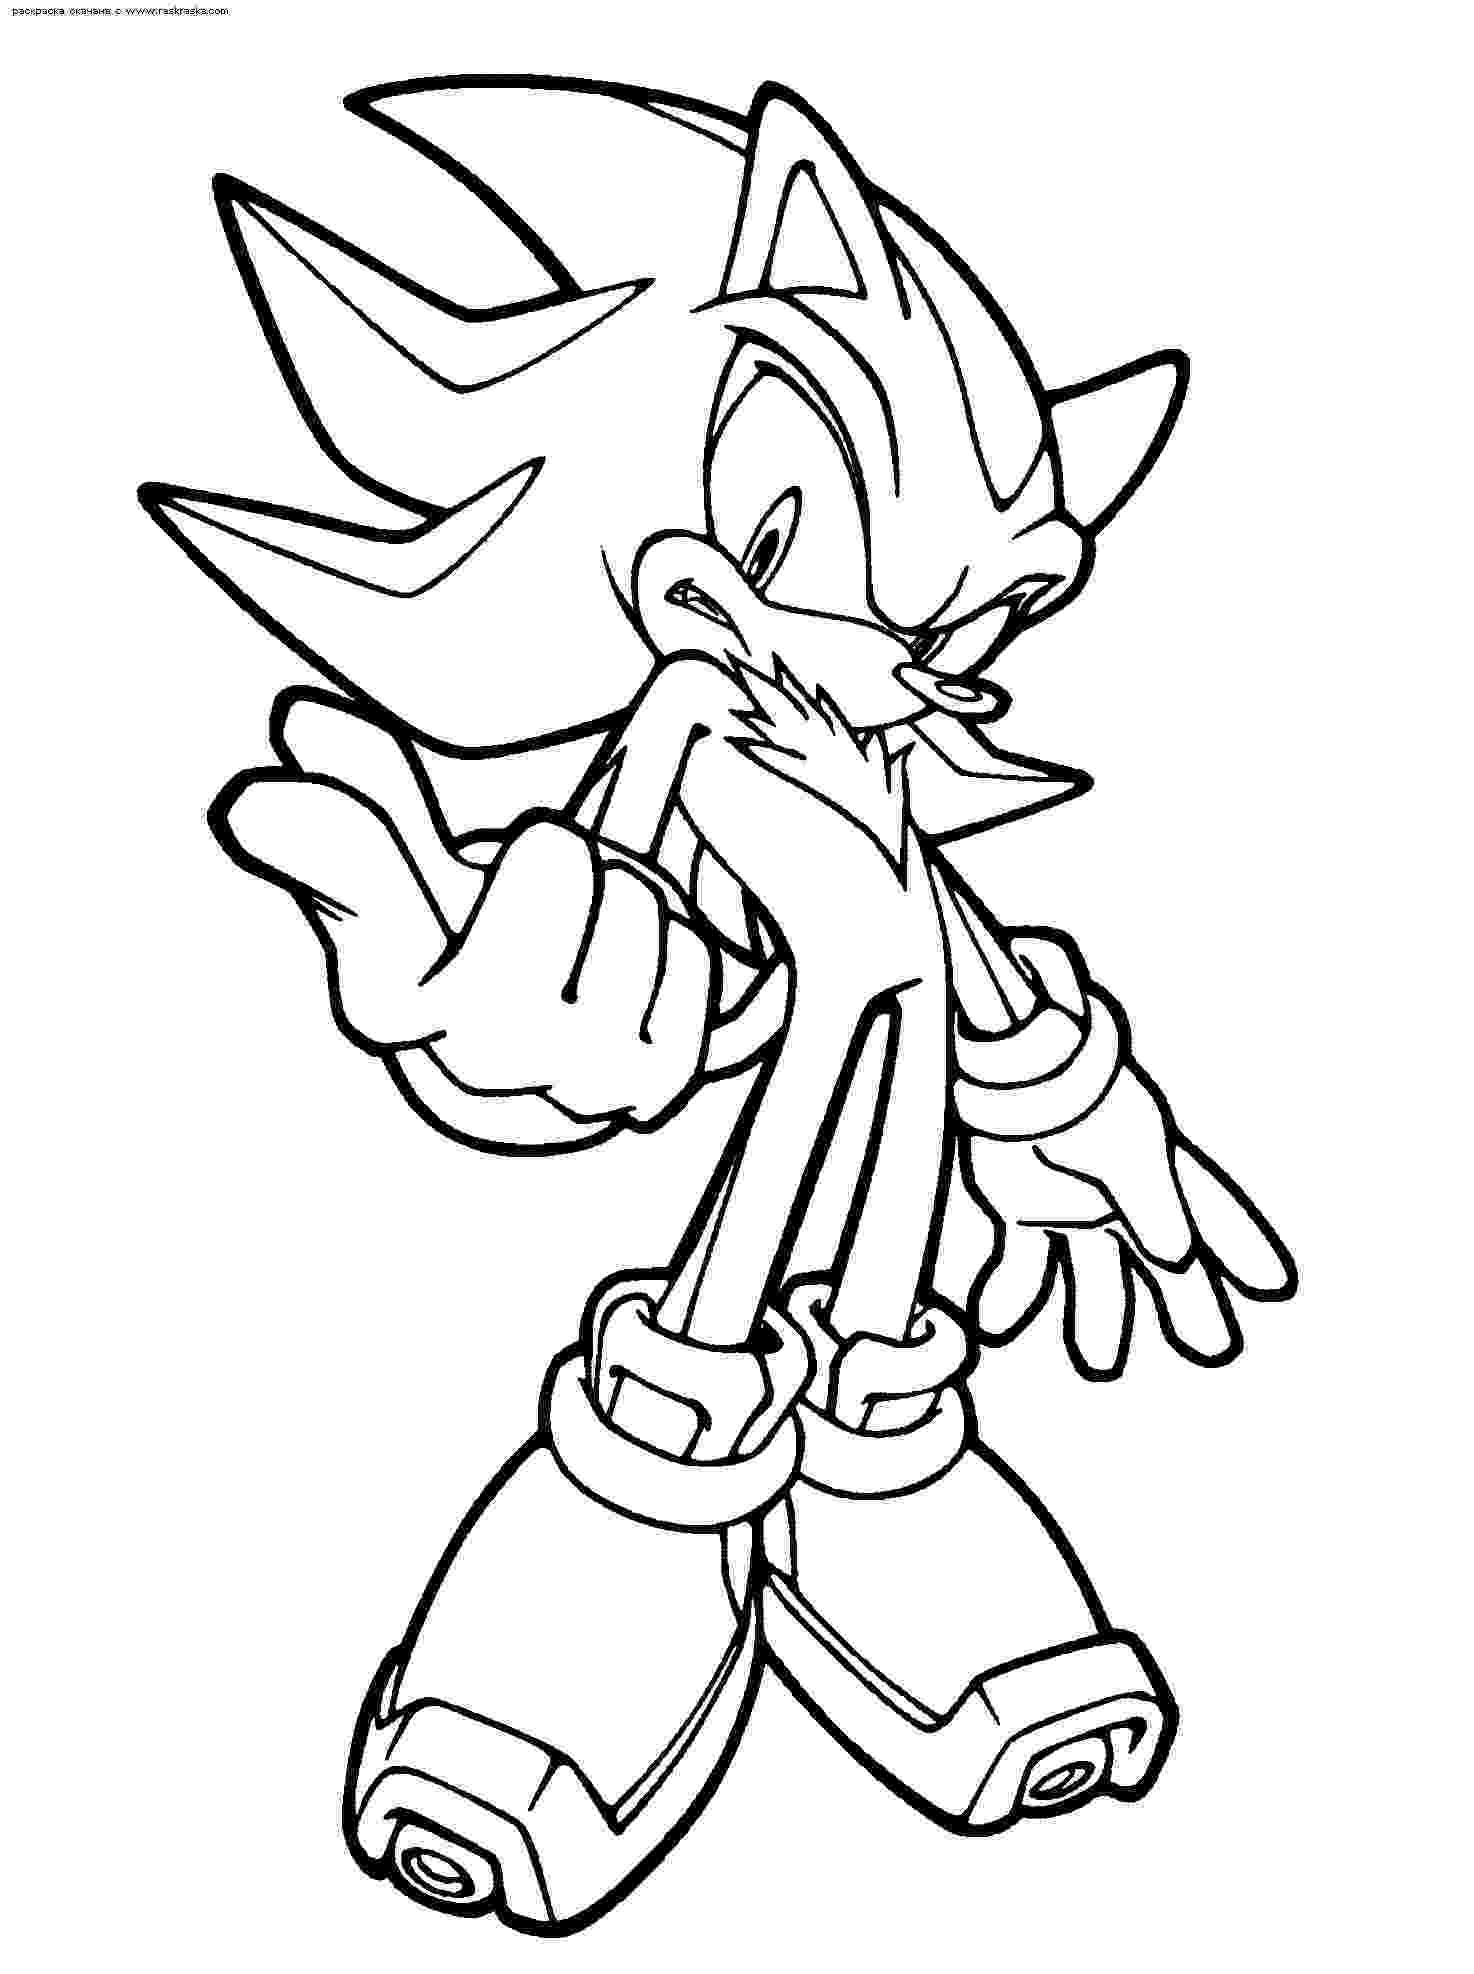 knuckles coloring pages sonic the hedgehog coloring pages knuckles coloring pages knuckles coloring 